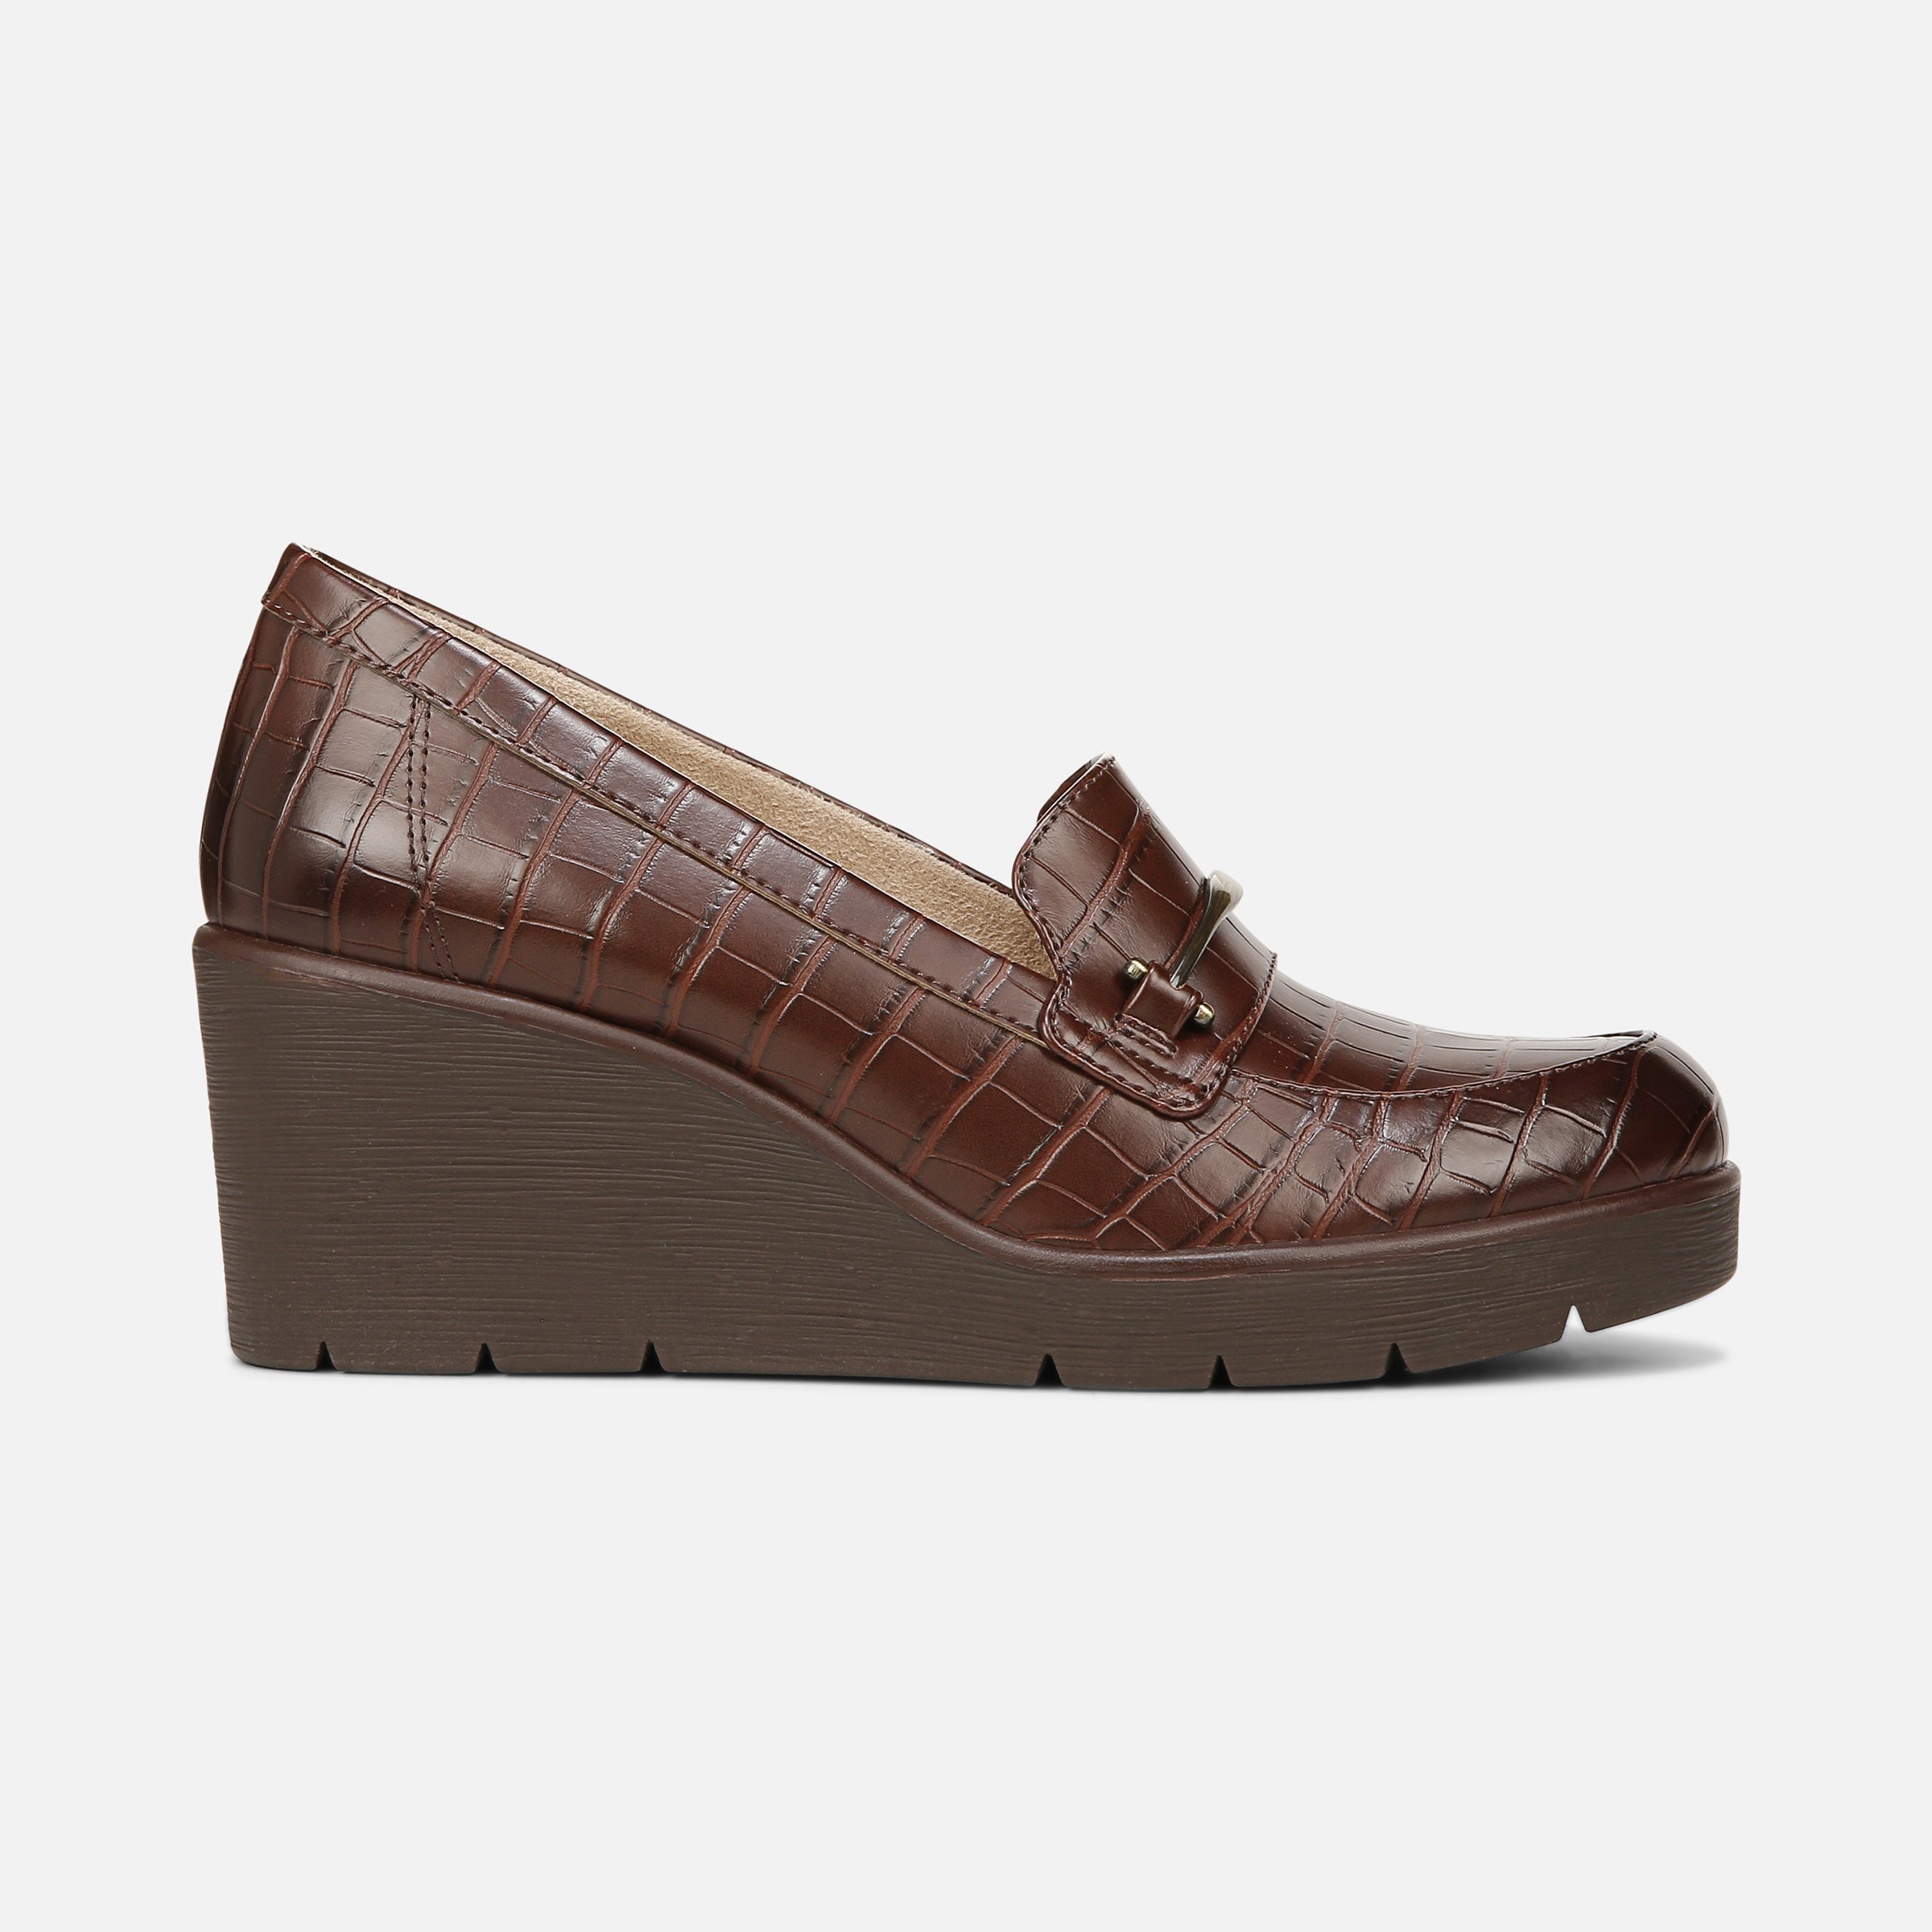 Wide Width, Soul Achieve Wedge Shoes - Naturalizer